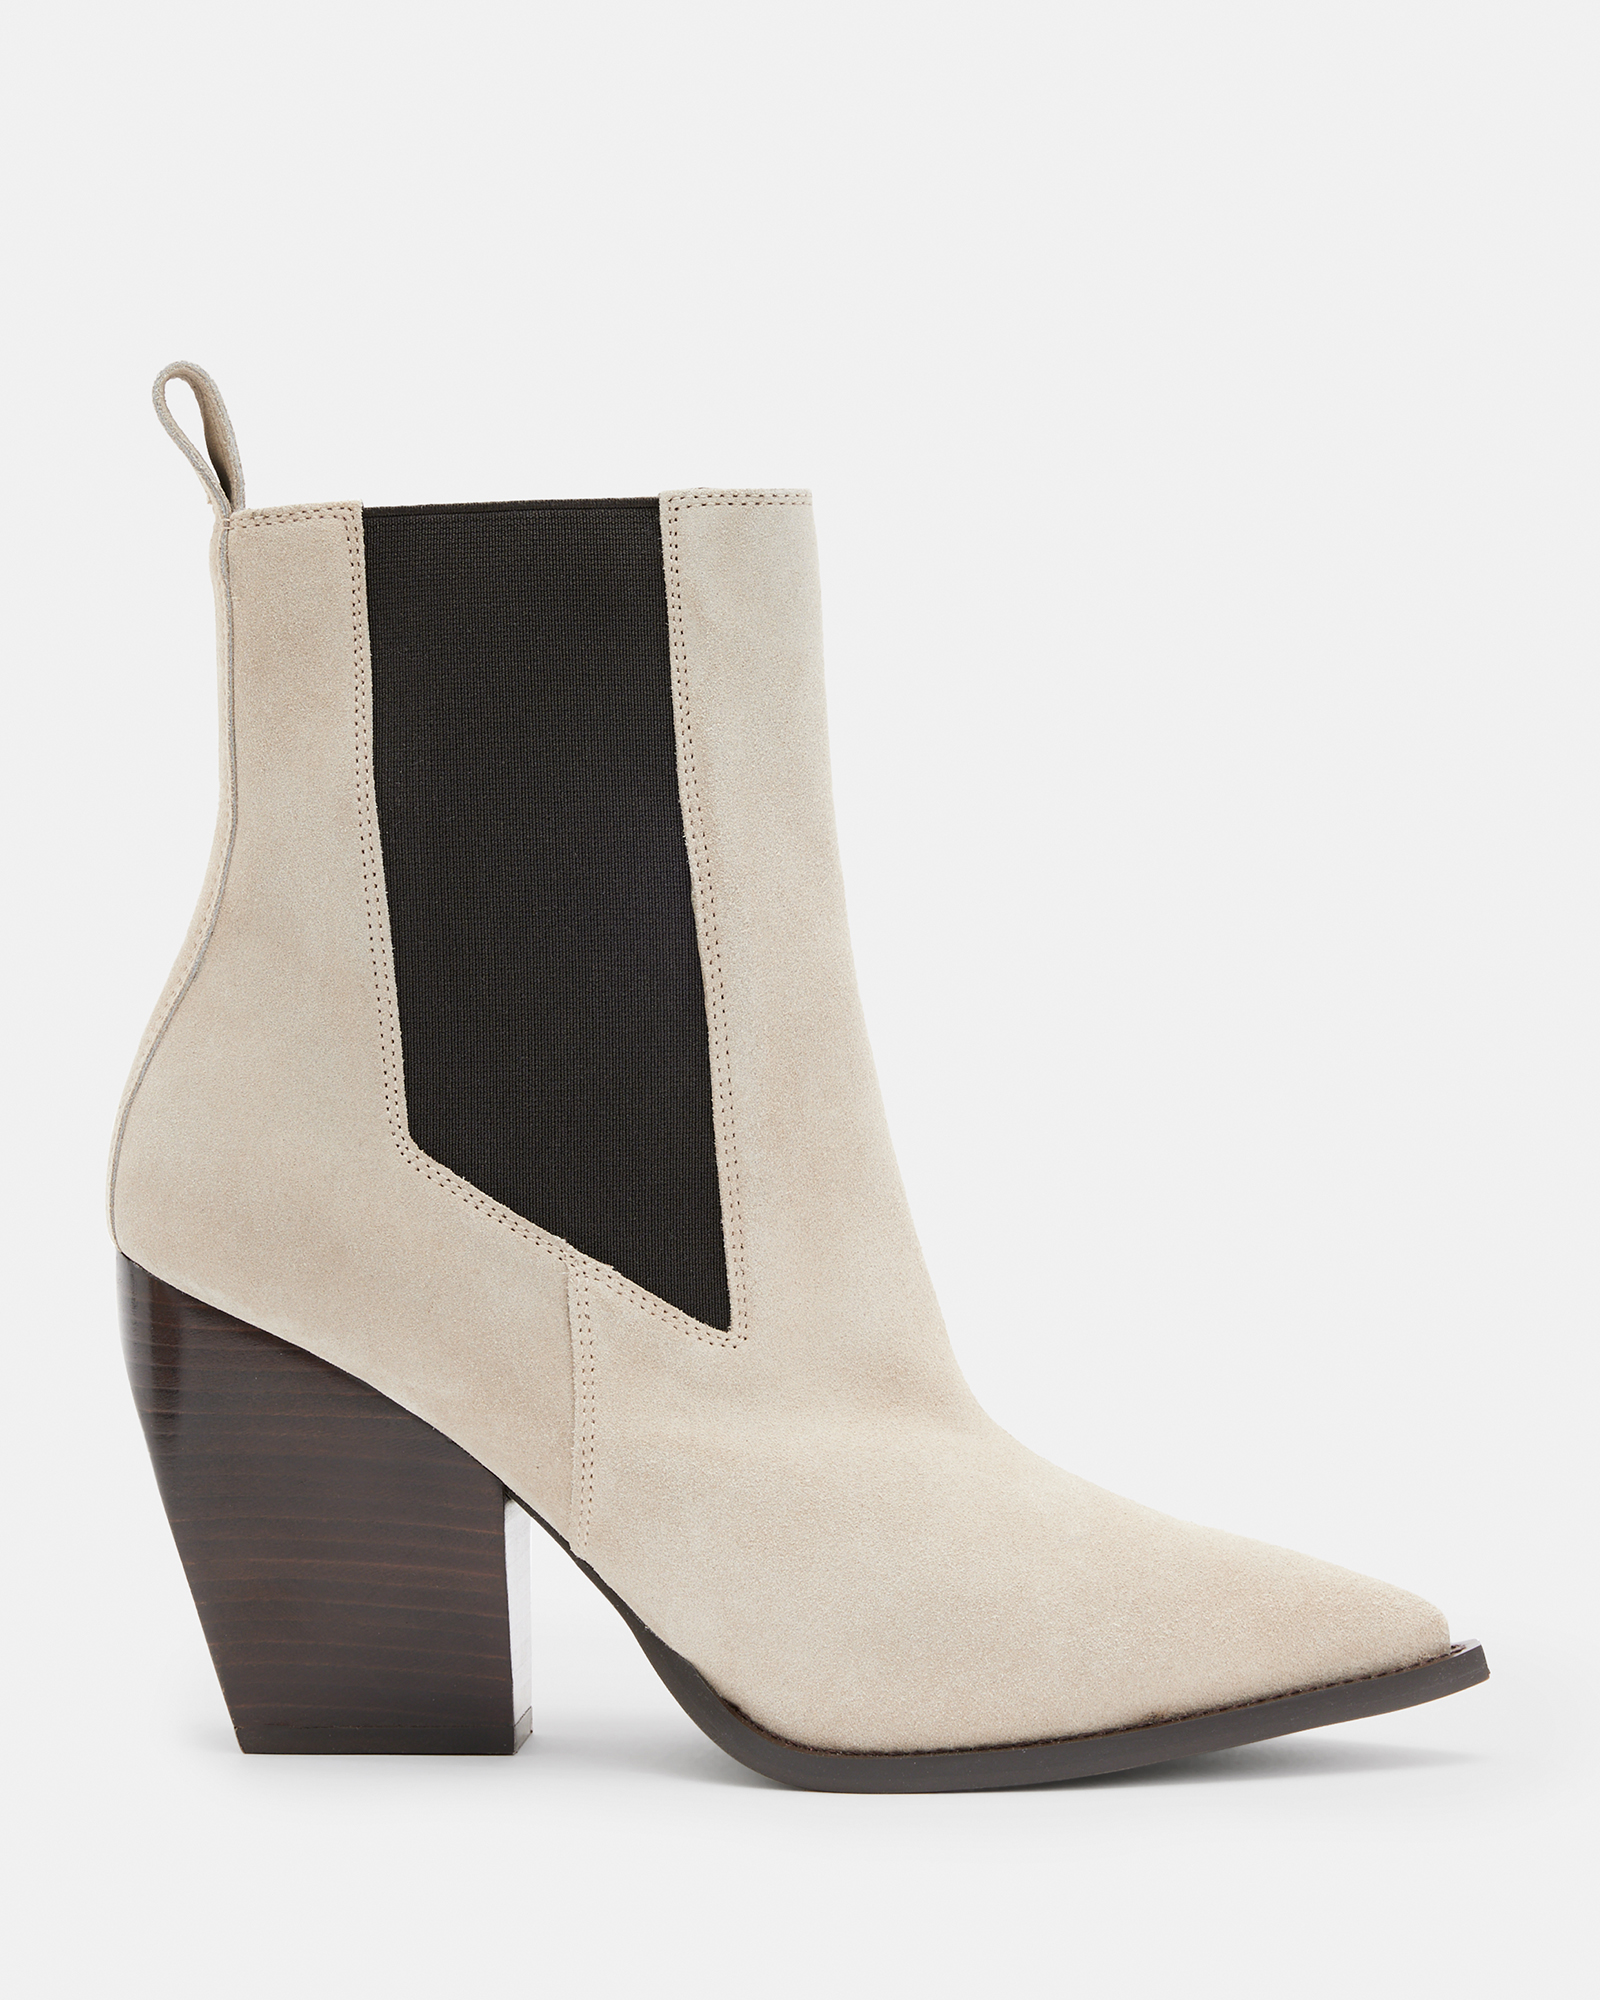 AllSaints Ria Pointed Suede Heeled Boots